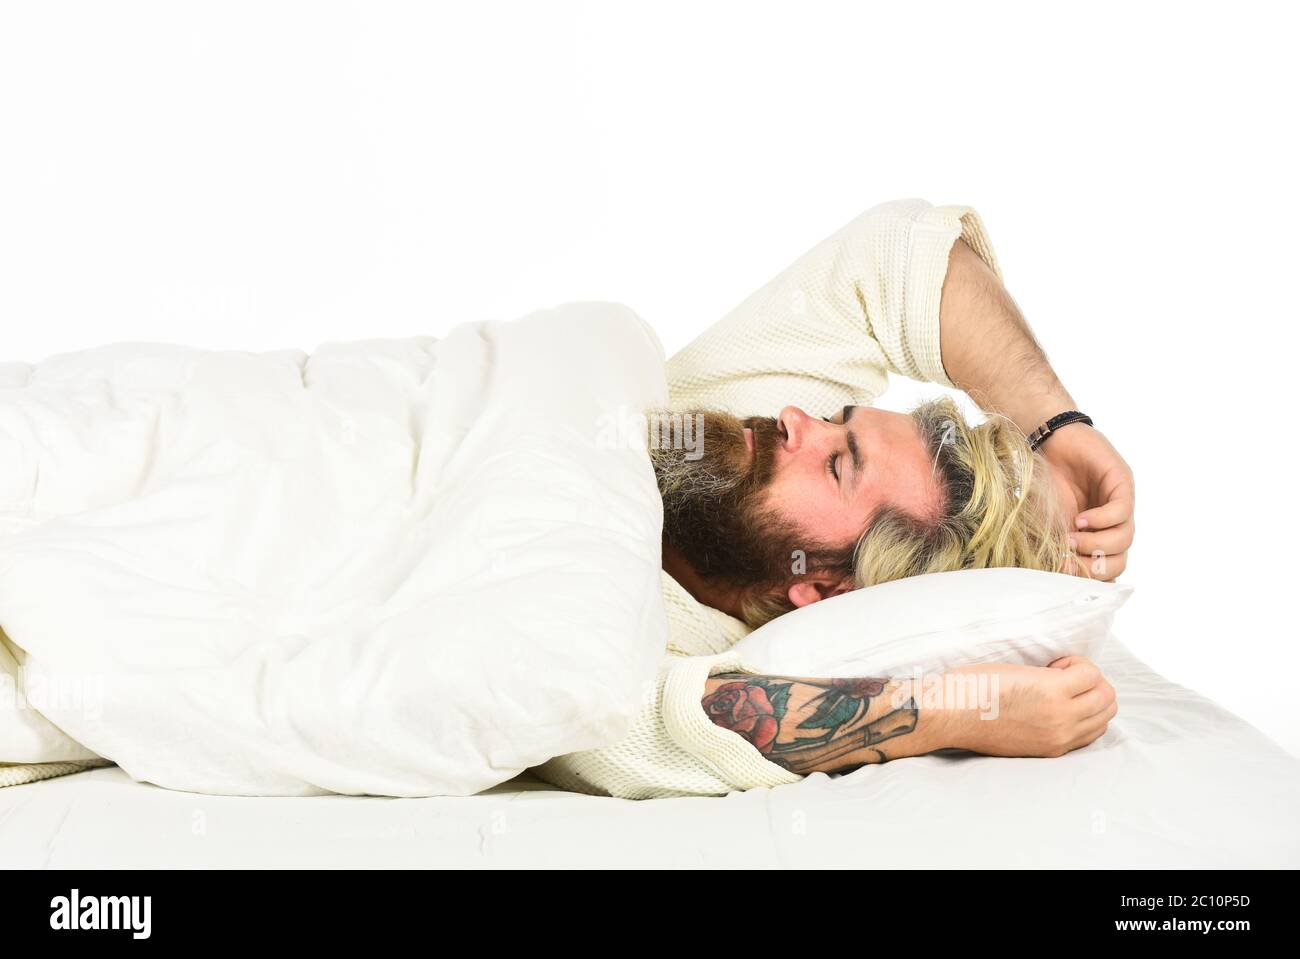 Practice relaxing bedtime ritual. Man with sleepy face lay on pillow. Fast asleep concept. Man with beard relaxing. Hipster with beard fall asleep. Having nap. Sweet dreams. Good night. Mental health. Stock Photo